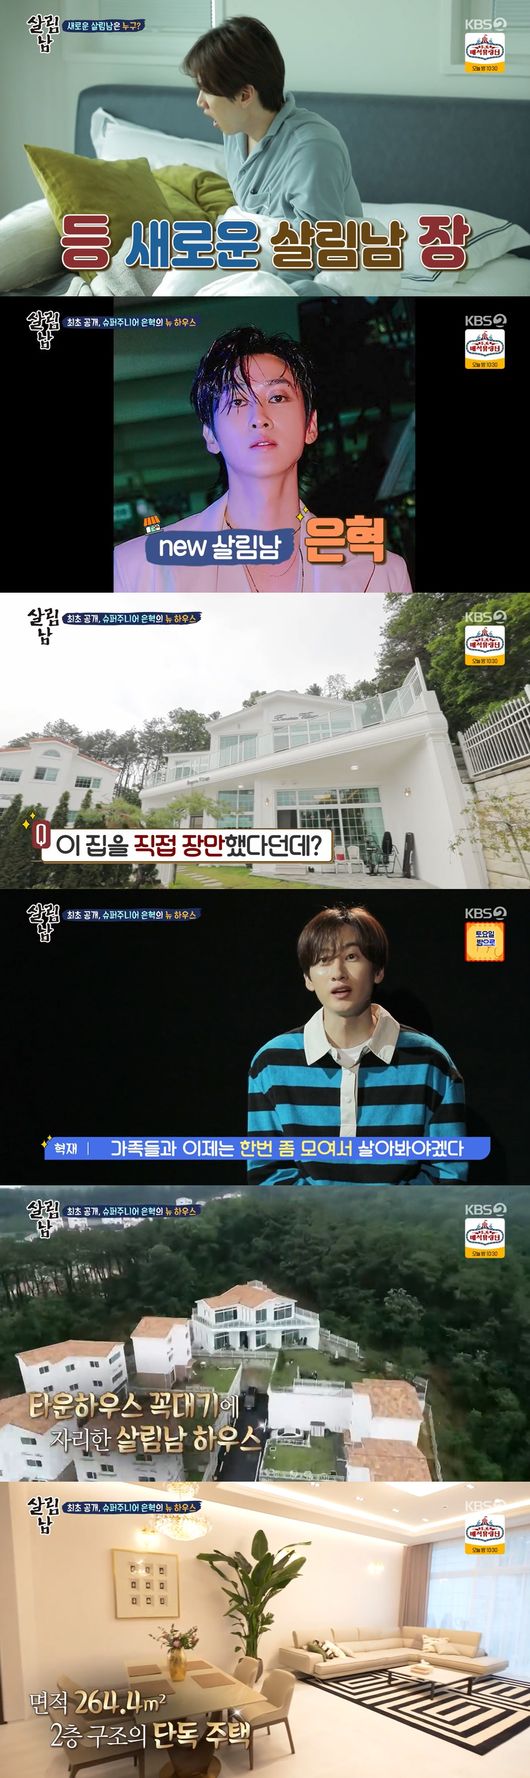 Super Junior Eunhyuk joins as new SalimnamOn KBS2TV Living Men broadcast on the 19th, Super Juniors Eunhyuk unveiled Townhouse, which lives with Family.The new family of Salimnam Eunhyuk appeared on the day; Eunhyuks father woke the Family as the bells rang from morning.Eunhyuk said, It is the new housekeeper, the Eunhyuk Lee Hyuk Jae of Super Junior. I have been living with family members for 17 years since my debut.Eunhyuk was a two-story detached house at the top of the Townhouse, eye-catching with its modern living room and luxurious interior.In addition, the marble-armed bathroom was complete with a sauna, which surprised the surroundings.I like the impression of both of you, said Eunhyuks father, Lee Kang-heon, Mother Jang Duk-bun.I think Family has been living together for about 20 years; Eunhyuk lived in a lodge when he was a kid, Mother said.As soon as he woke up in the morning, he got Mothers errand and started cooking, making the surroundings laugh; Eunhyuk said: I think everyone will sympathize.Im not ready to come out because Im done. I dont know why youre doing this. Mother laughed. The children do not know the living.I thought it would be a reference to one anyway. I called it in advance. Eunhyuk really does not know any cooking. Eunhyuks sister Lee So-ra said hello; the father called her daughter Petit; Lee So-ra said: I havent called her Soraya since I was a child.So it is not strange. My father said, I call it Petit because I am objectively beautiful, and my wife calls me a pretty person. My father then laughed, saying, Hyukjae is just Lee Hyukjae.On the day, Eunhyuks Mother was struggling and made Cough surprised around. I learned about the outbreak in 2017.I have epileptic pneumonia. I talked about lung transplantation at the hospital. I have to live a lot of lung transplants for seven years. The doctor told me that I should always be ready, so I thought I should live with him, said Eunhyuk. My mother wakes up at dawn and Coughs.If the sound of Cough is different from usual, I have to go down, so I listen and then fall asleep. 